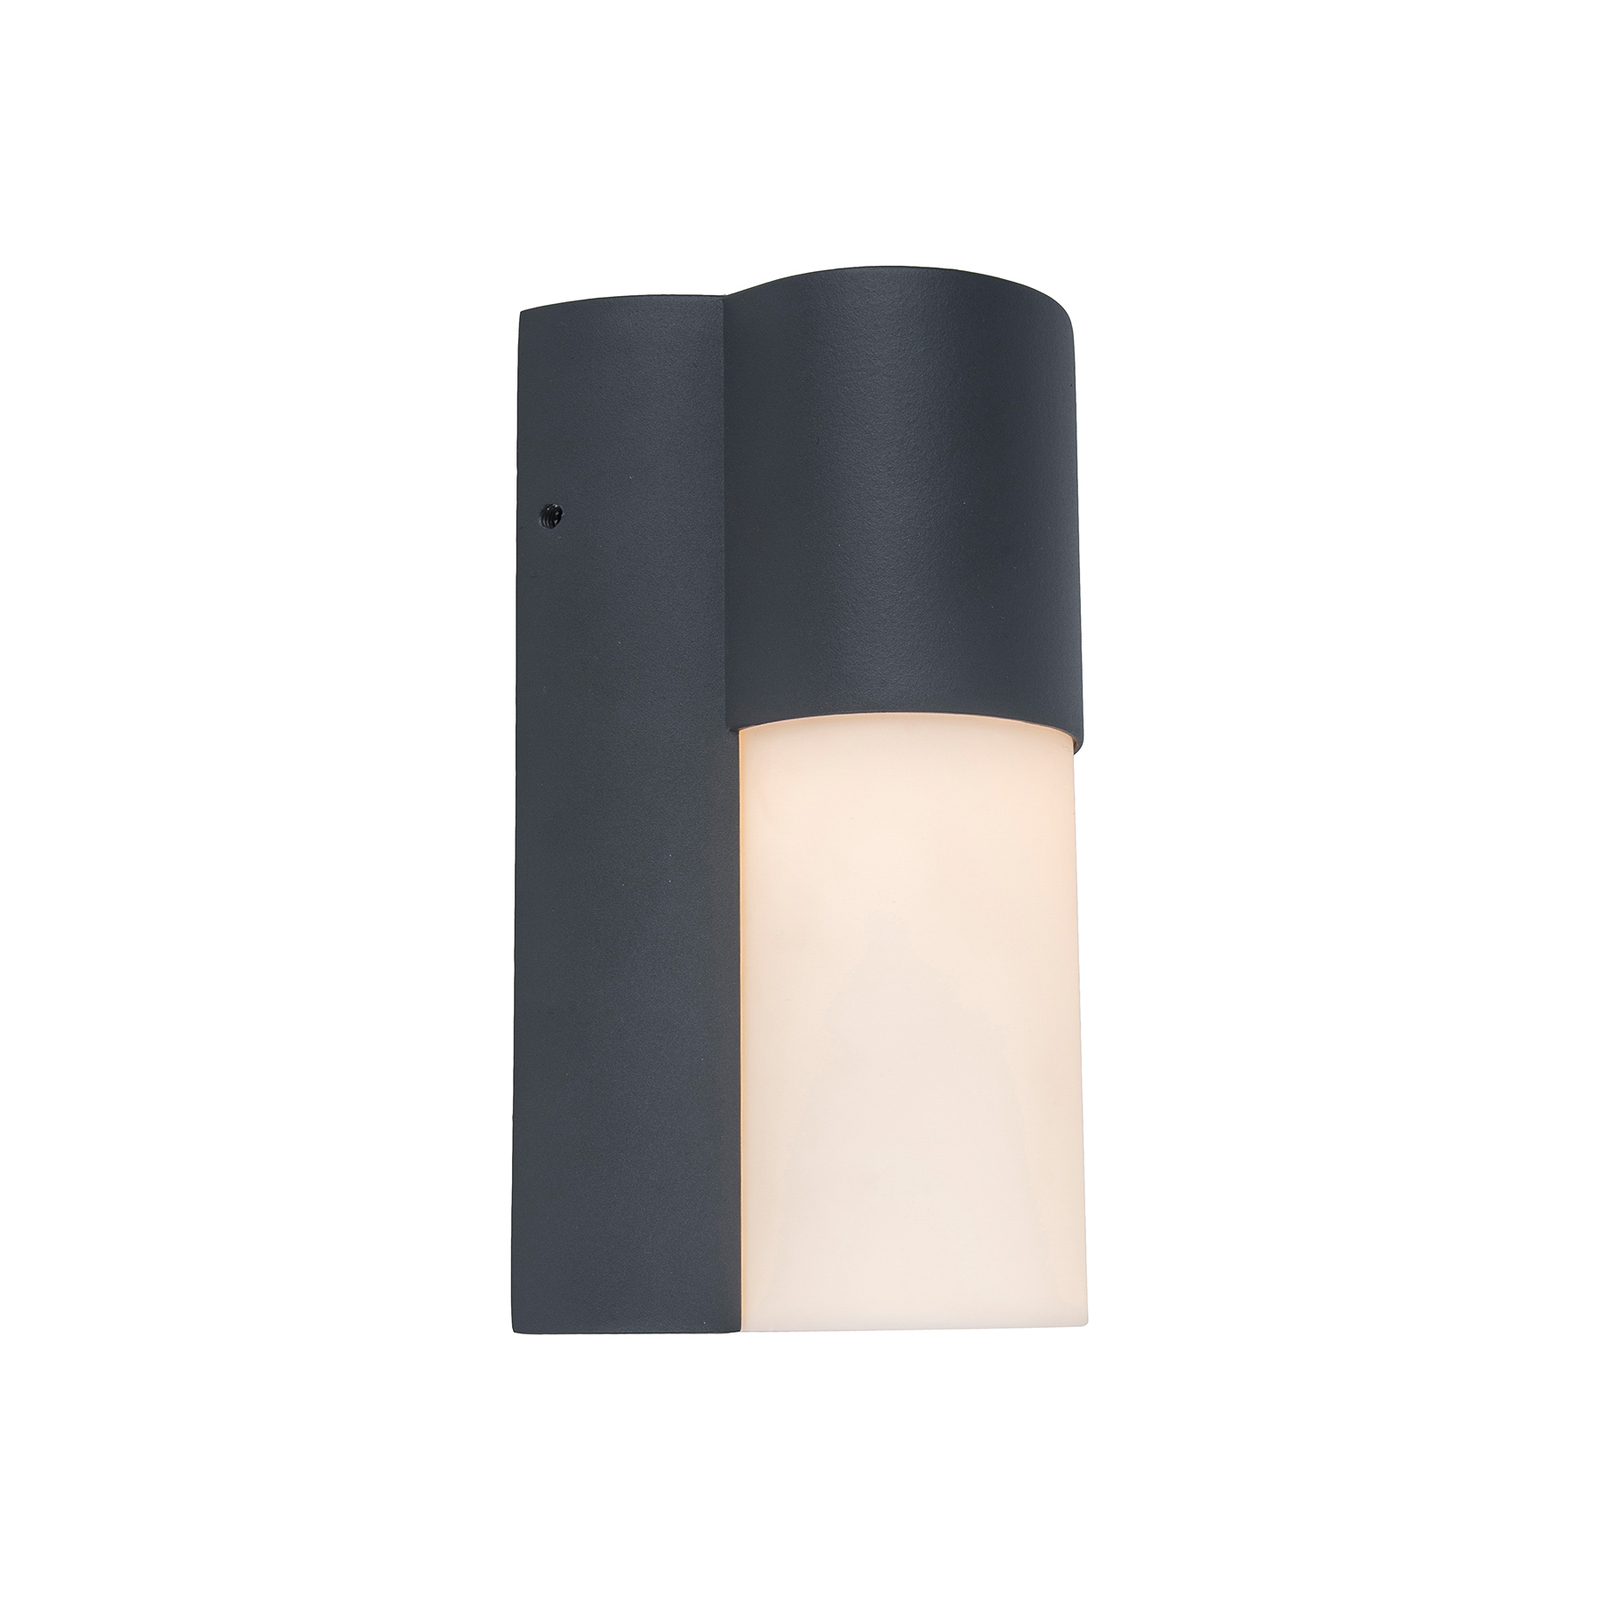 Urban outdoor wall light with a diffuser, IP54